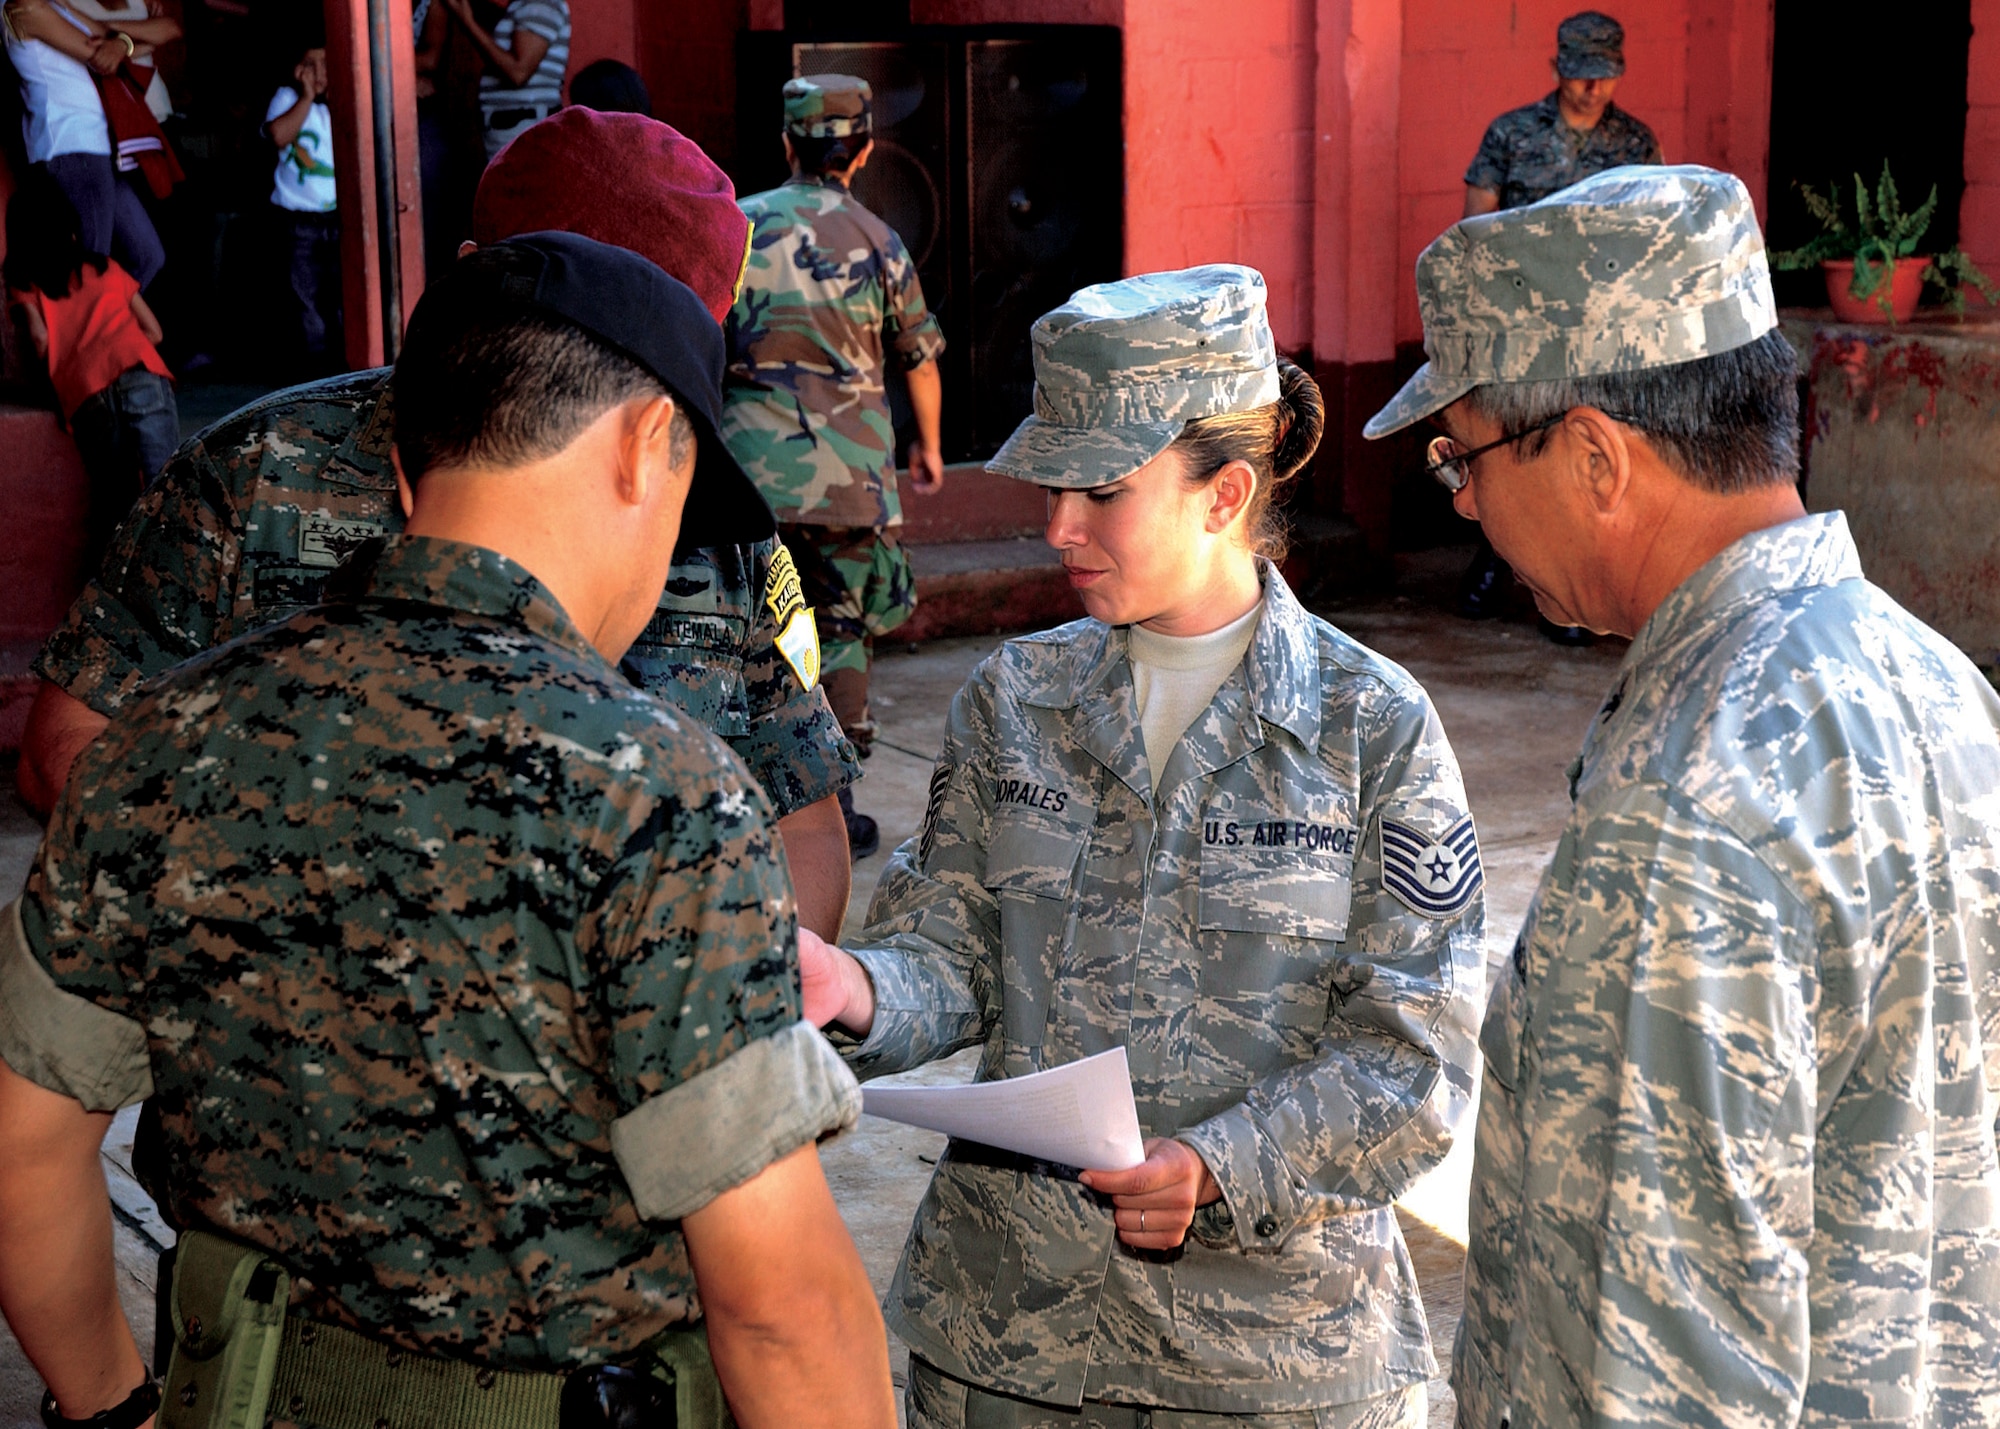 Tech. Sgt. Shirley Morales, 163d Reconnaissance Wing force development technician, reviews a script with U.S. and Guatemelan military members prior to an opening ceremony welcoming the 163d Medical Group to the country to provide medical care to the local citizens. (U.S. Air Force photo by Capt Al Bosco, 163RW/PA)